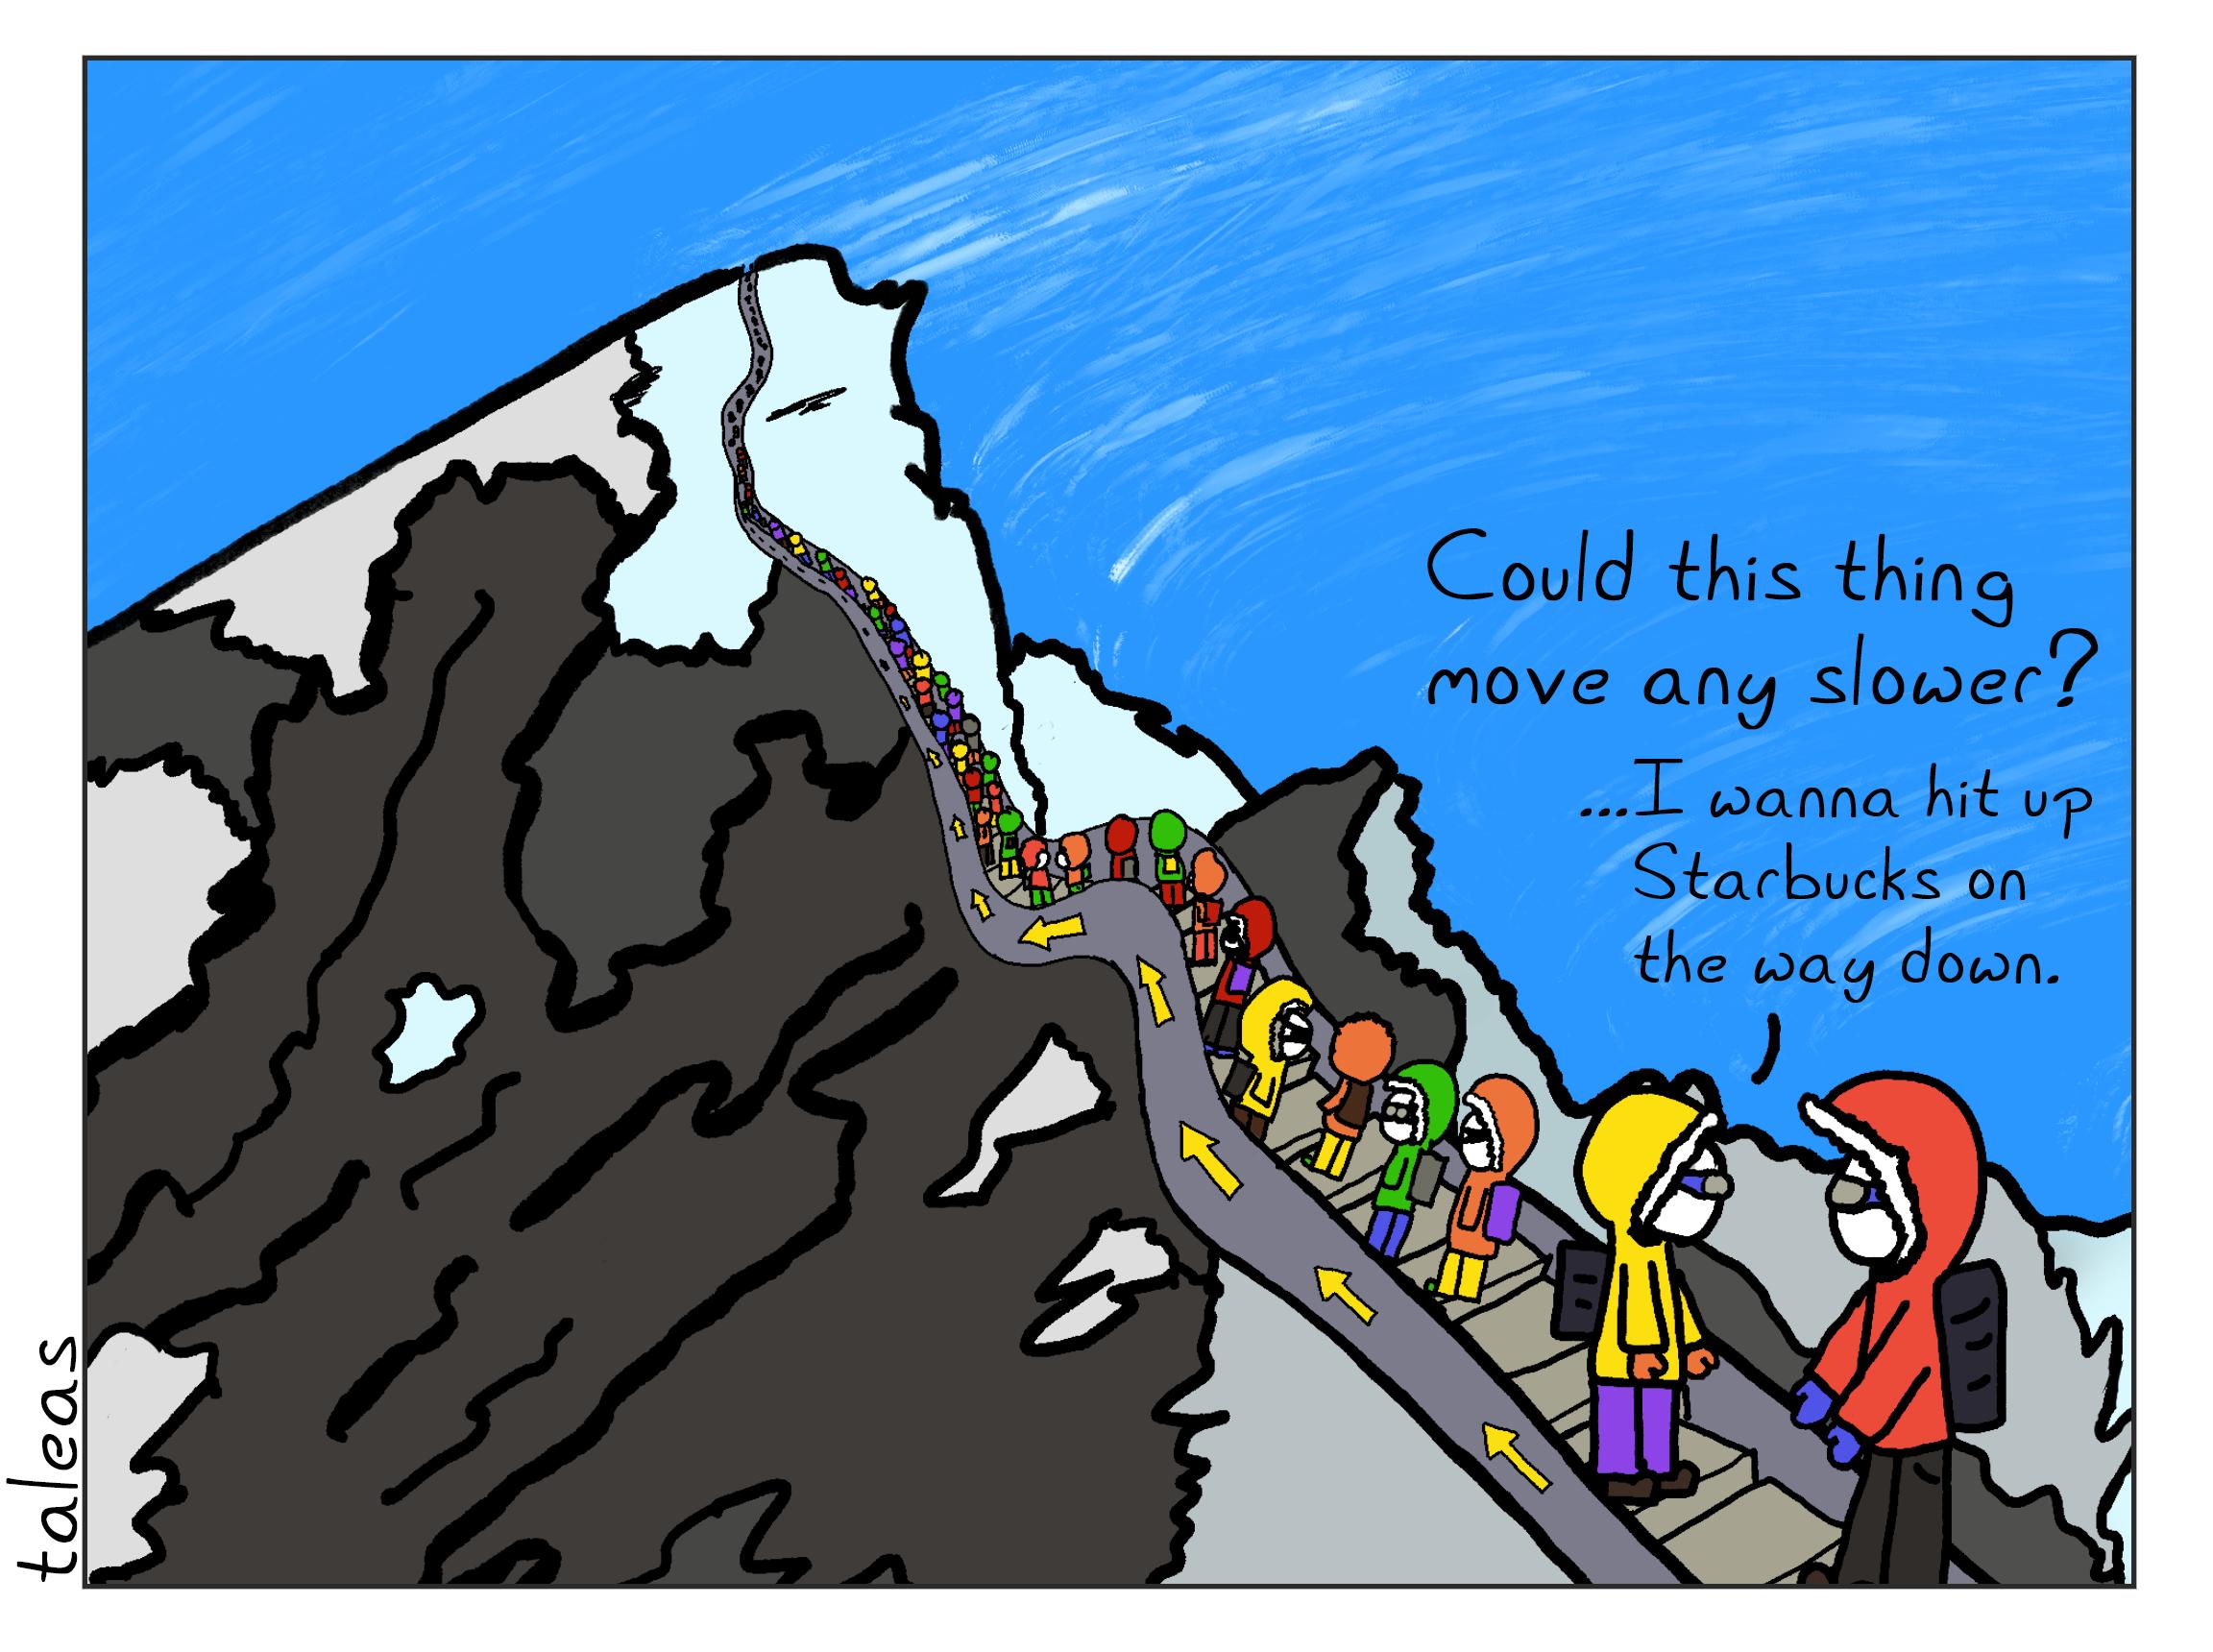 A scene reminiscent of Nirmal Purja's Traffic Jam on Mt. Everest photograph shows a line of climbers in full climbing gear standing on an escalator riding their way to the top of Mt. Everest. One rider laments, "Could this thing move any slower? ...I wanna hit up Starbucks on the way down."